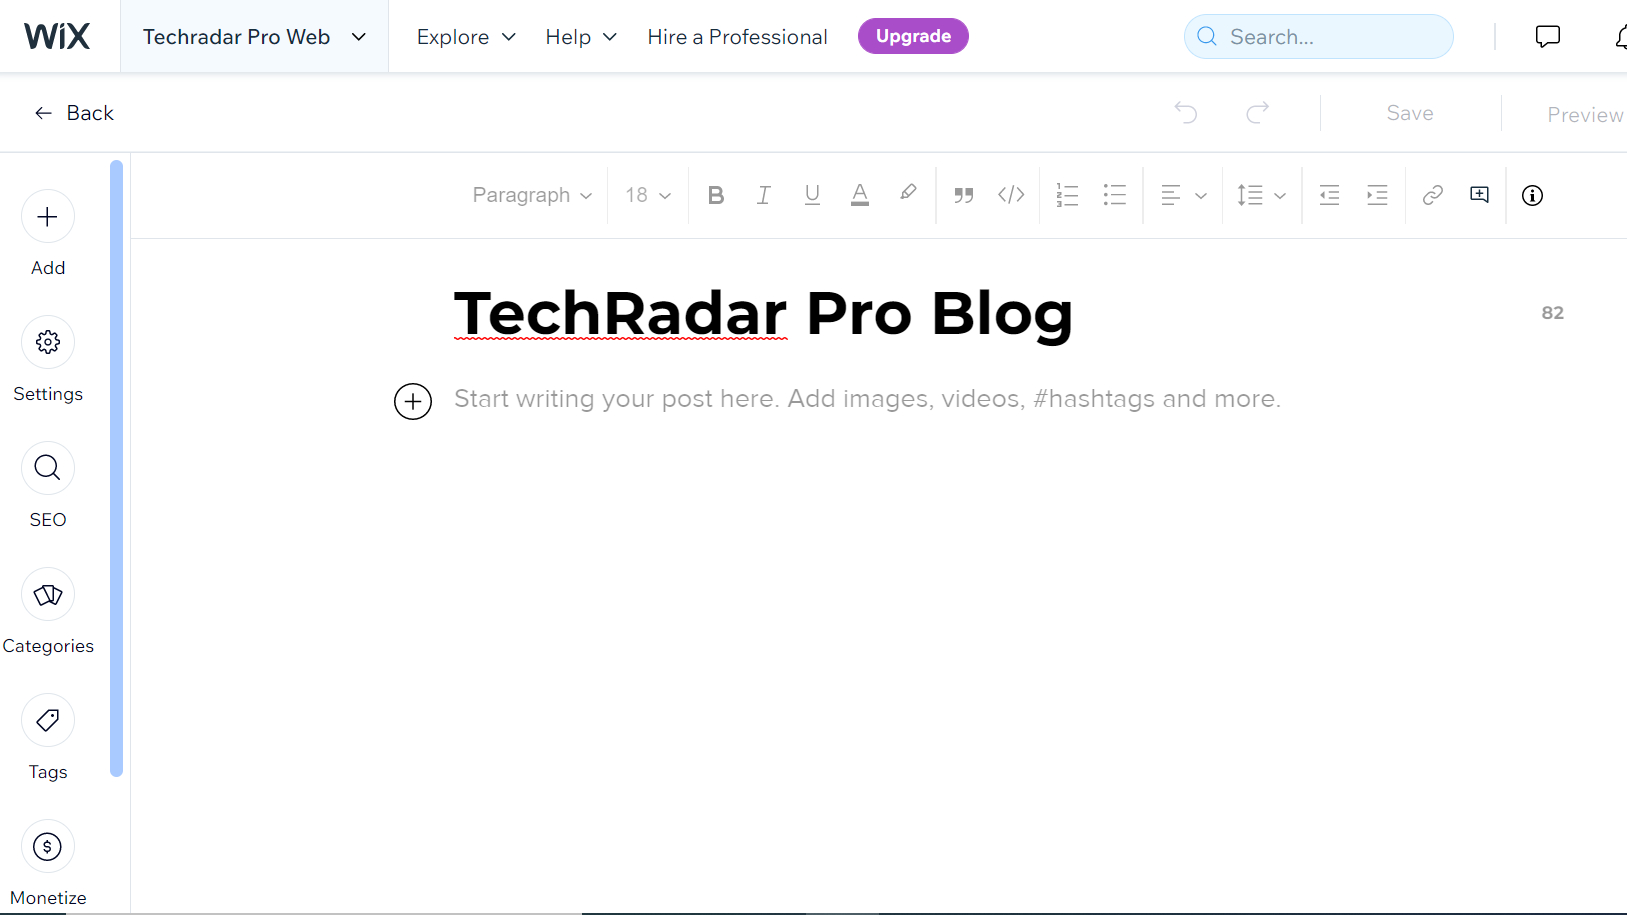 Wix's template is easy to use and there's an option to build your blog from scratch